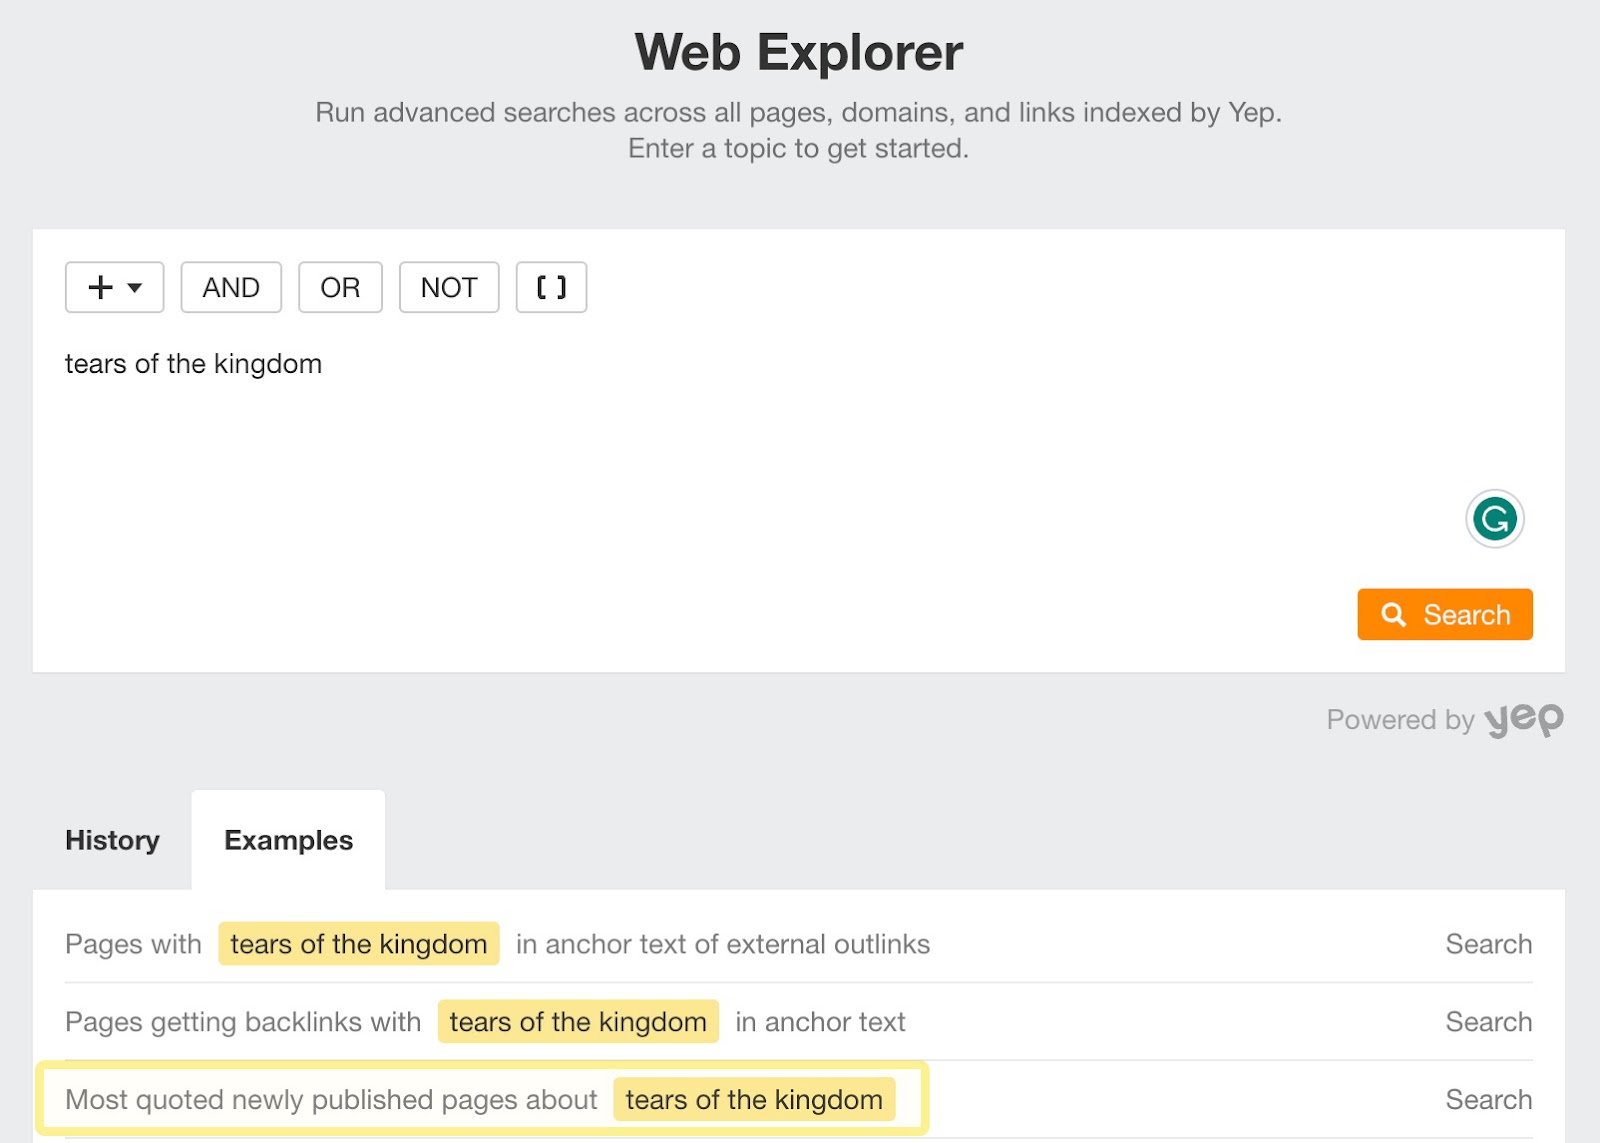 The Web Explorer landing page lets you apply predefined filters for specific use cases